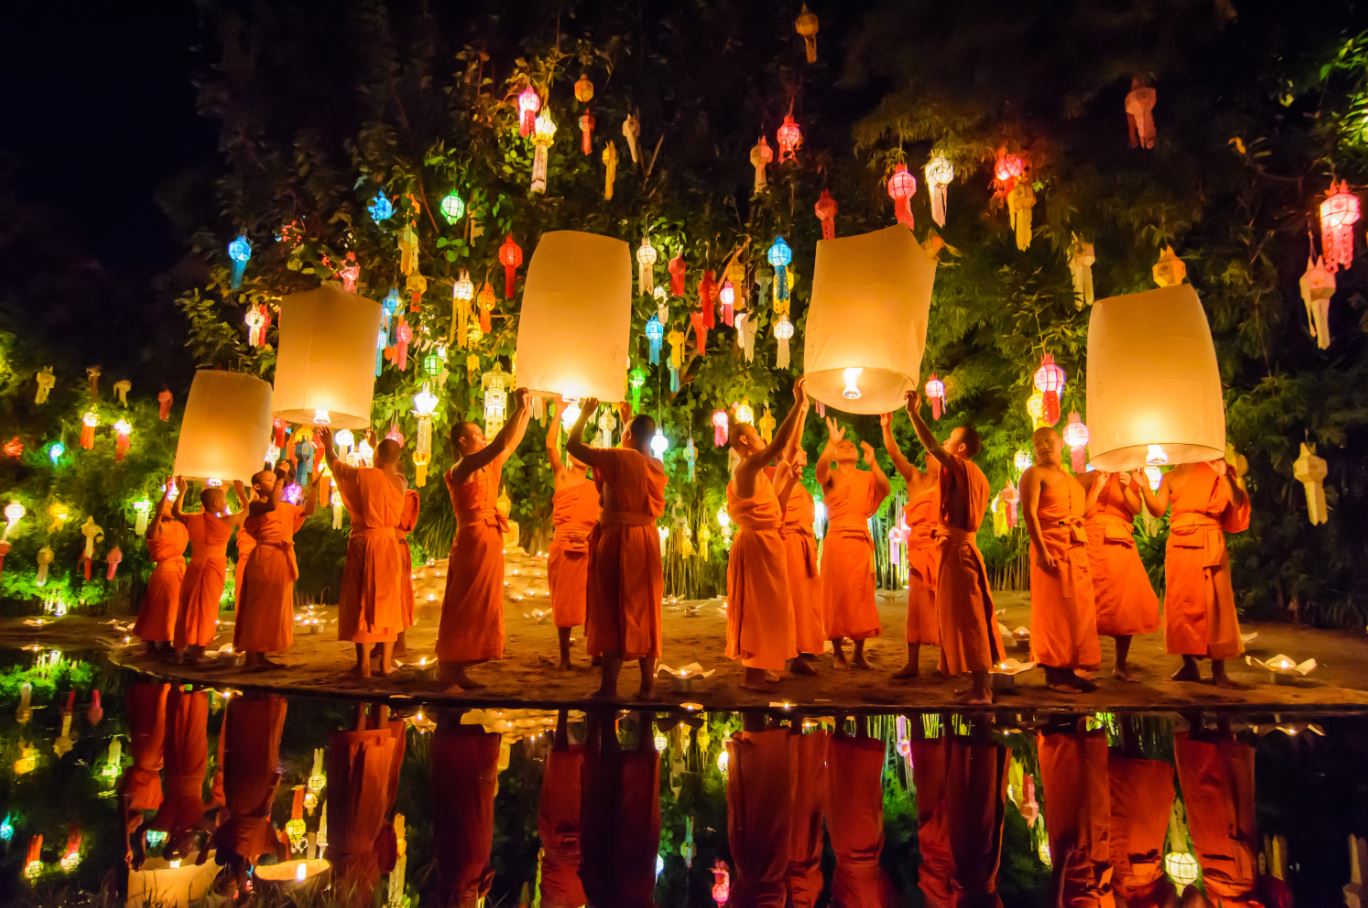 The Most Spectacular Lantern Festivals In Asia That You Shouldn’t Miss